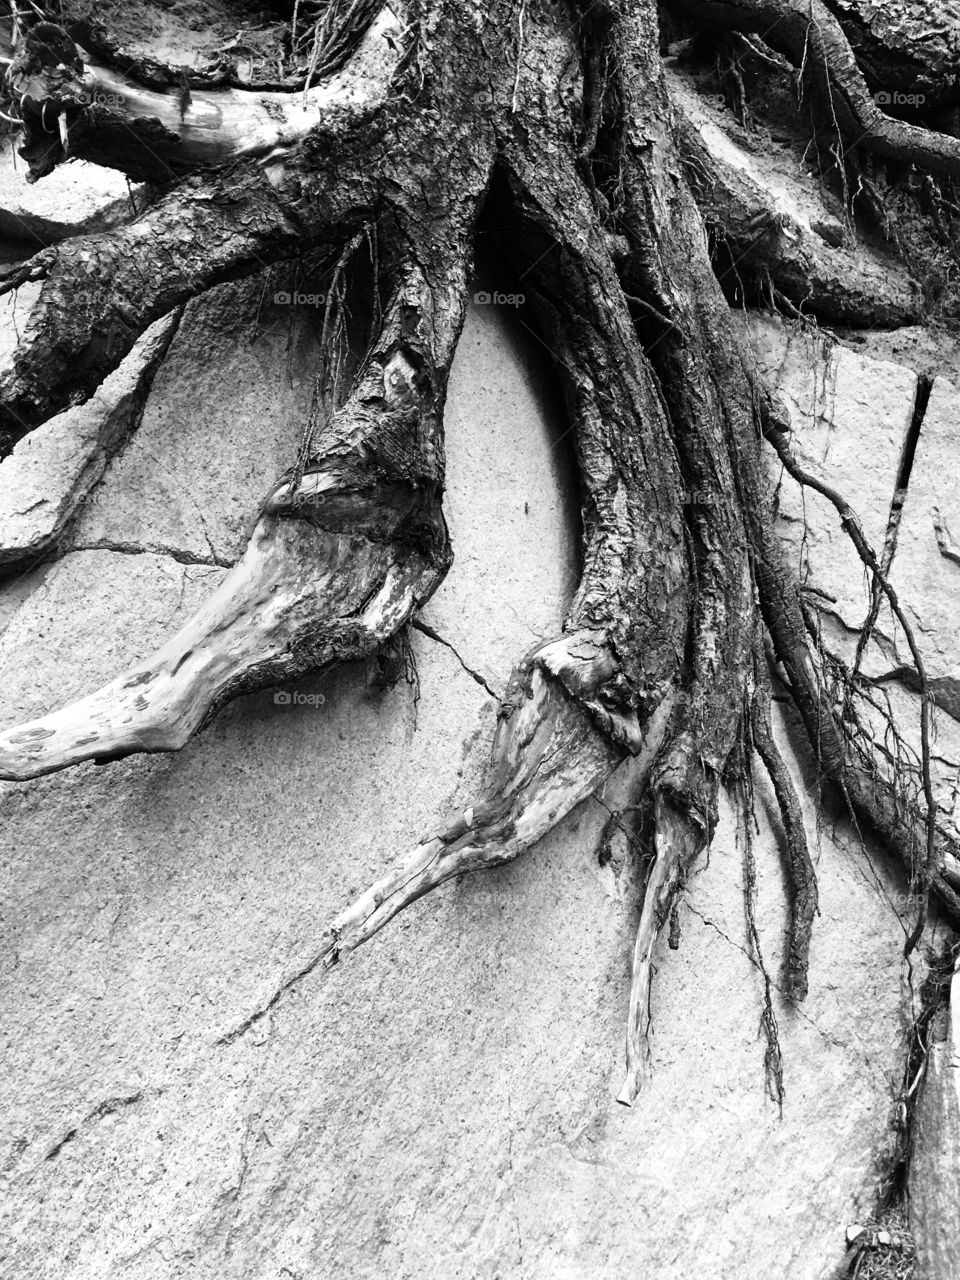 Stone roots